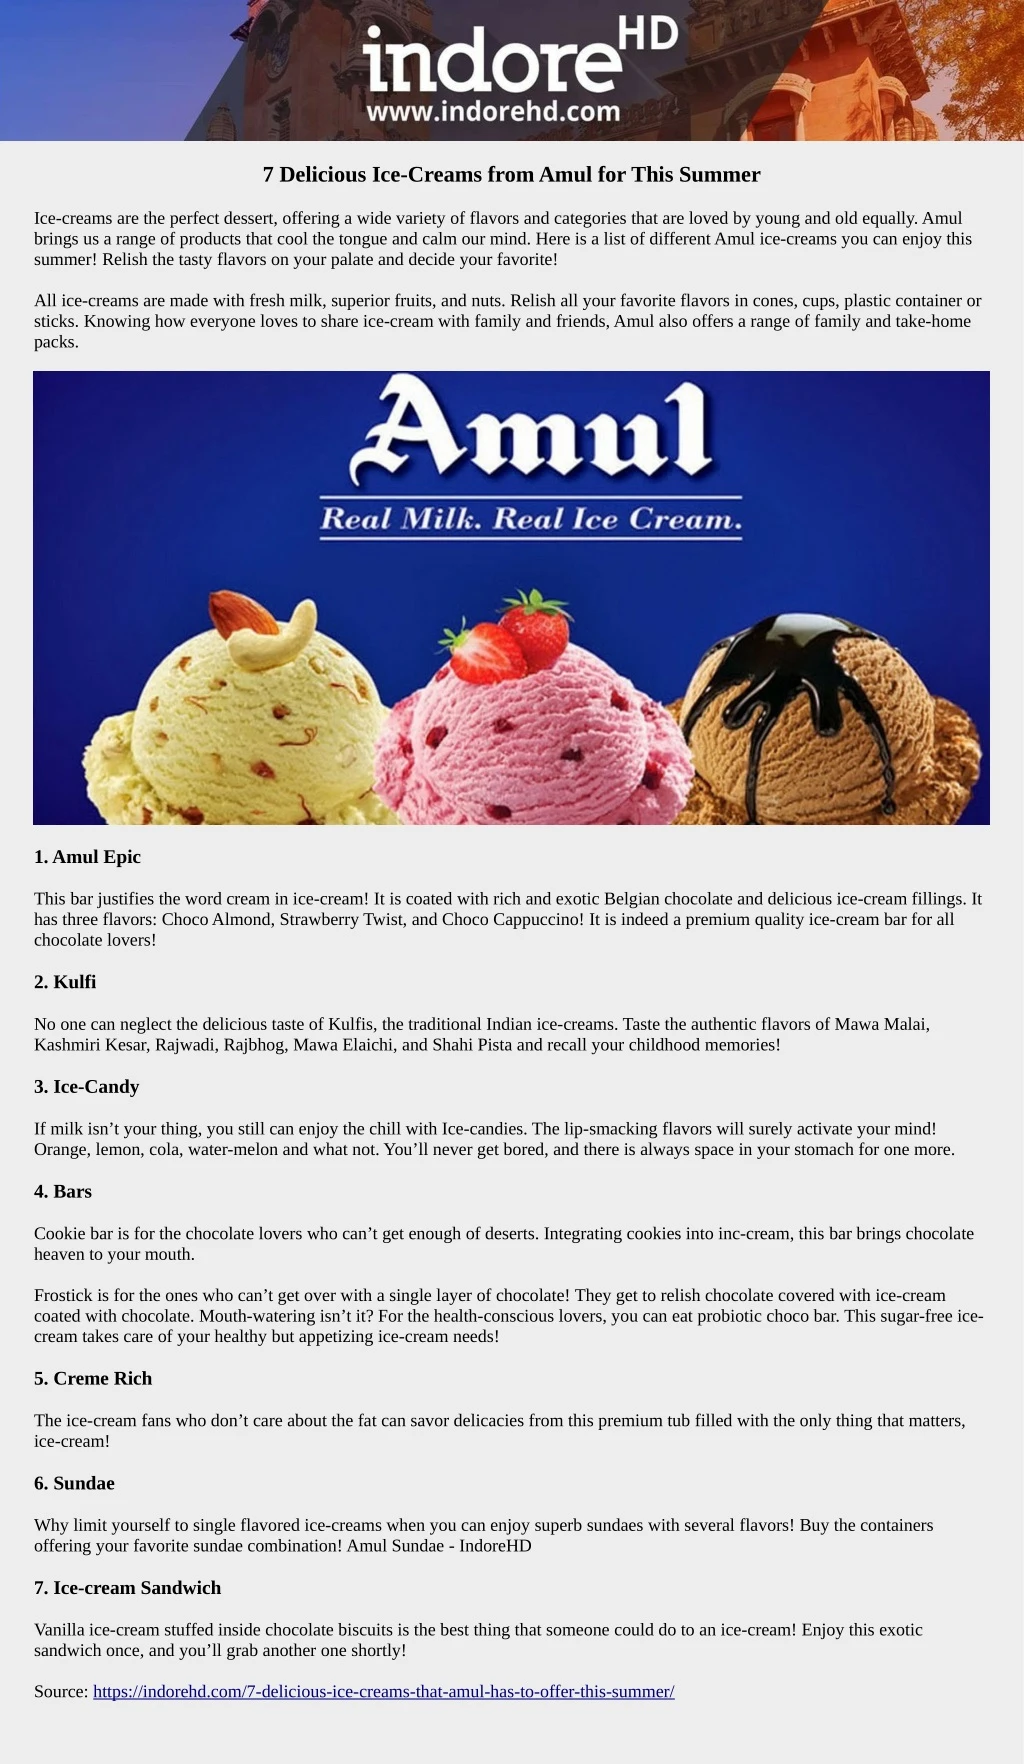 7 delicious ice creams from amul for this summer